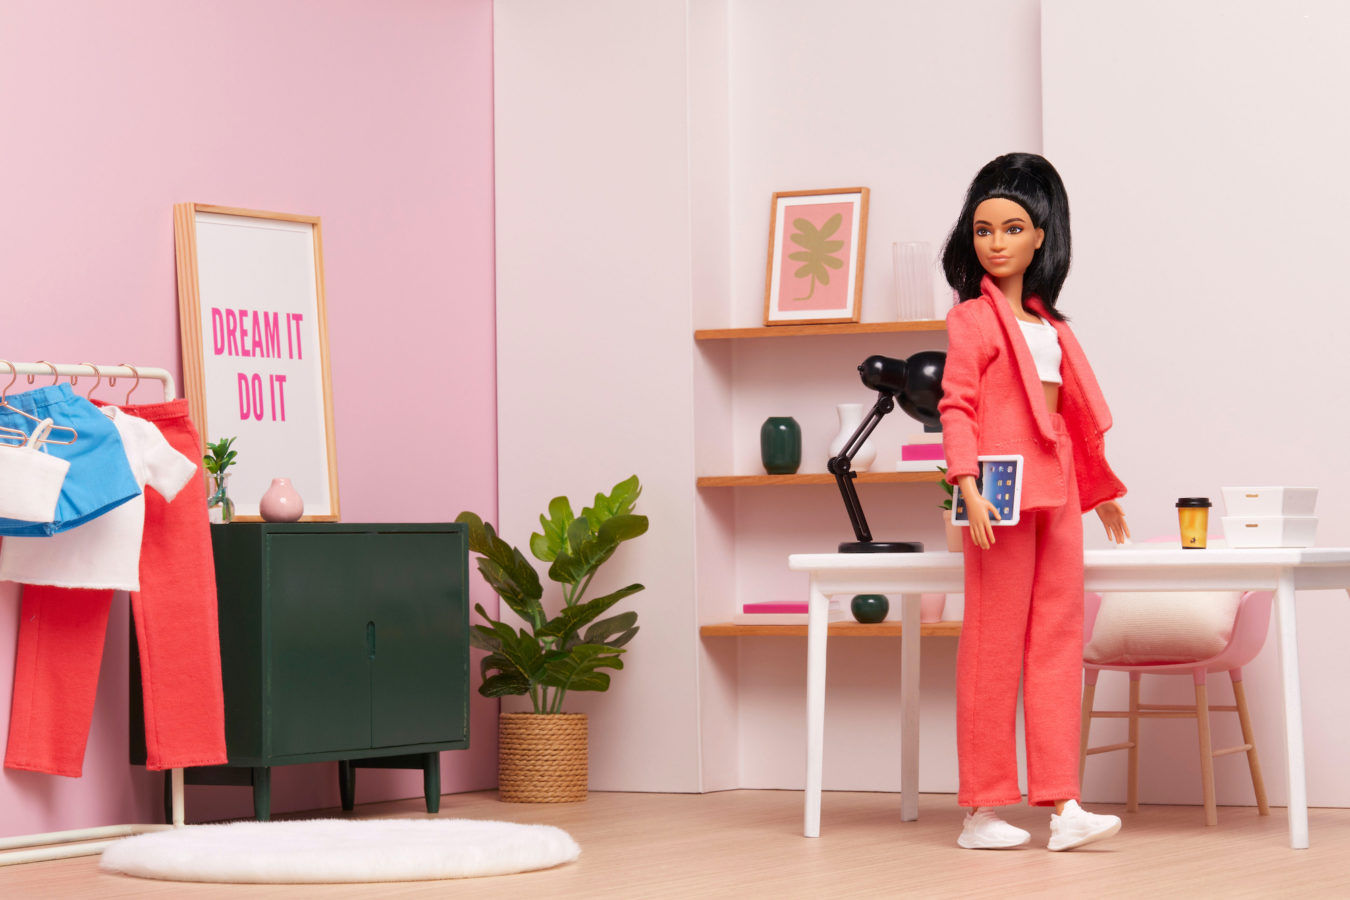 Love, Bonito joins forces with Mattel for a limited-edition Barbie collection